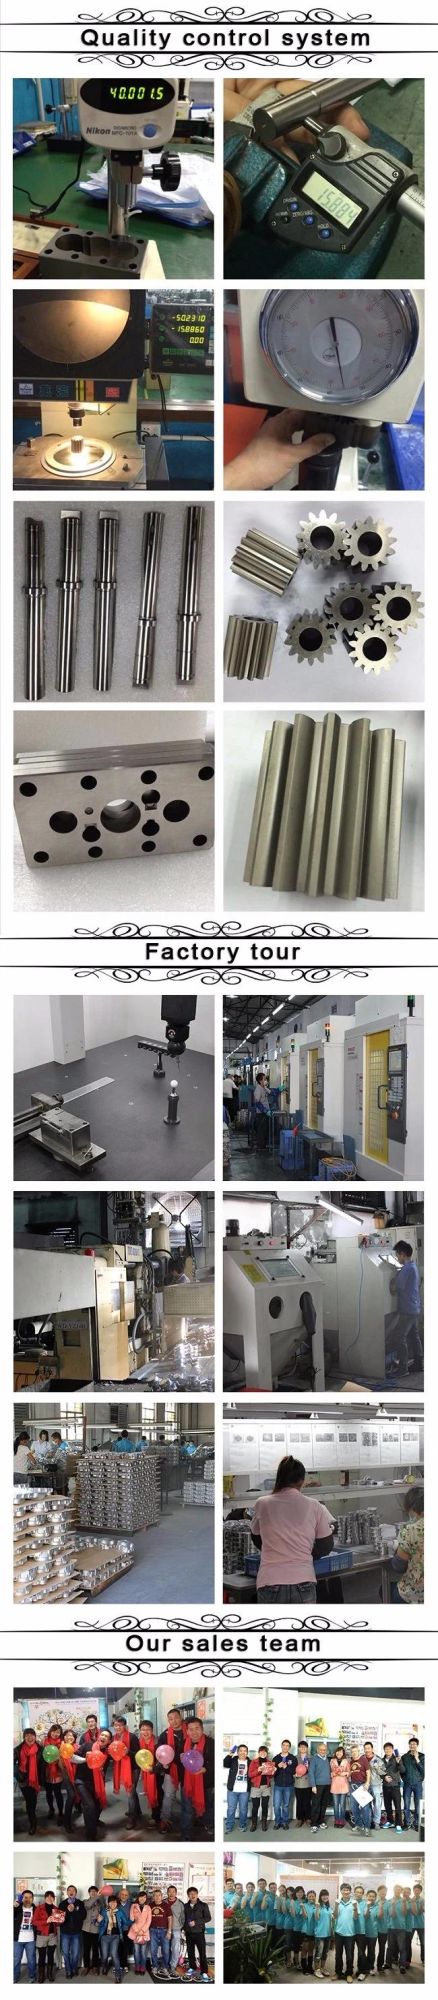 Aluminum Die Casting LED Housing Supplier China